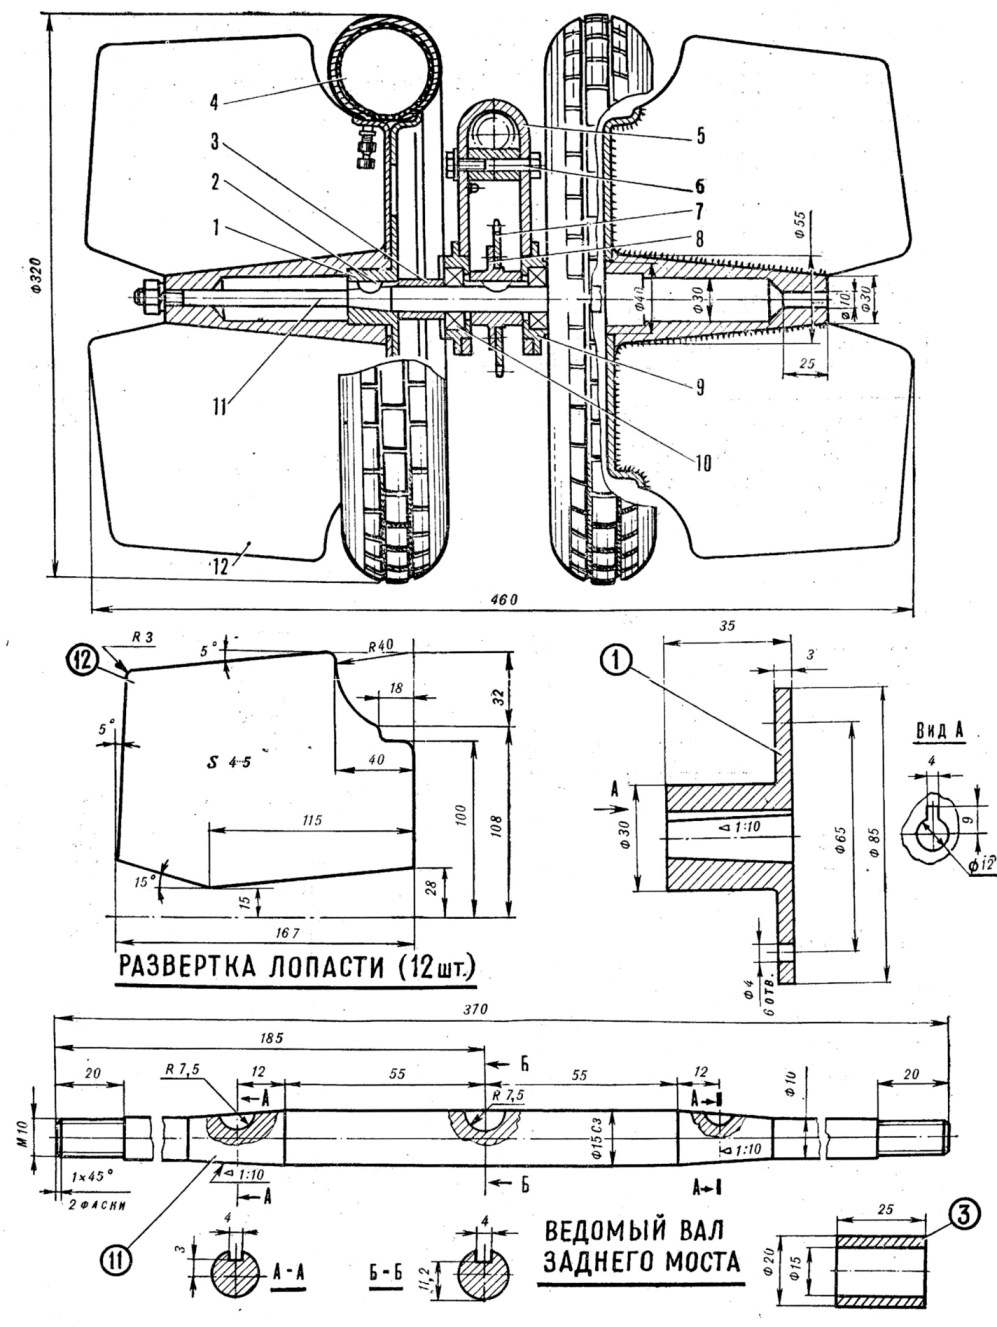 Fig. 3. The propulsion Assembly and details